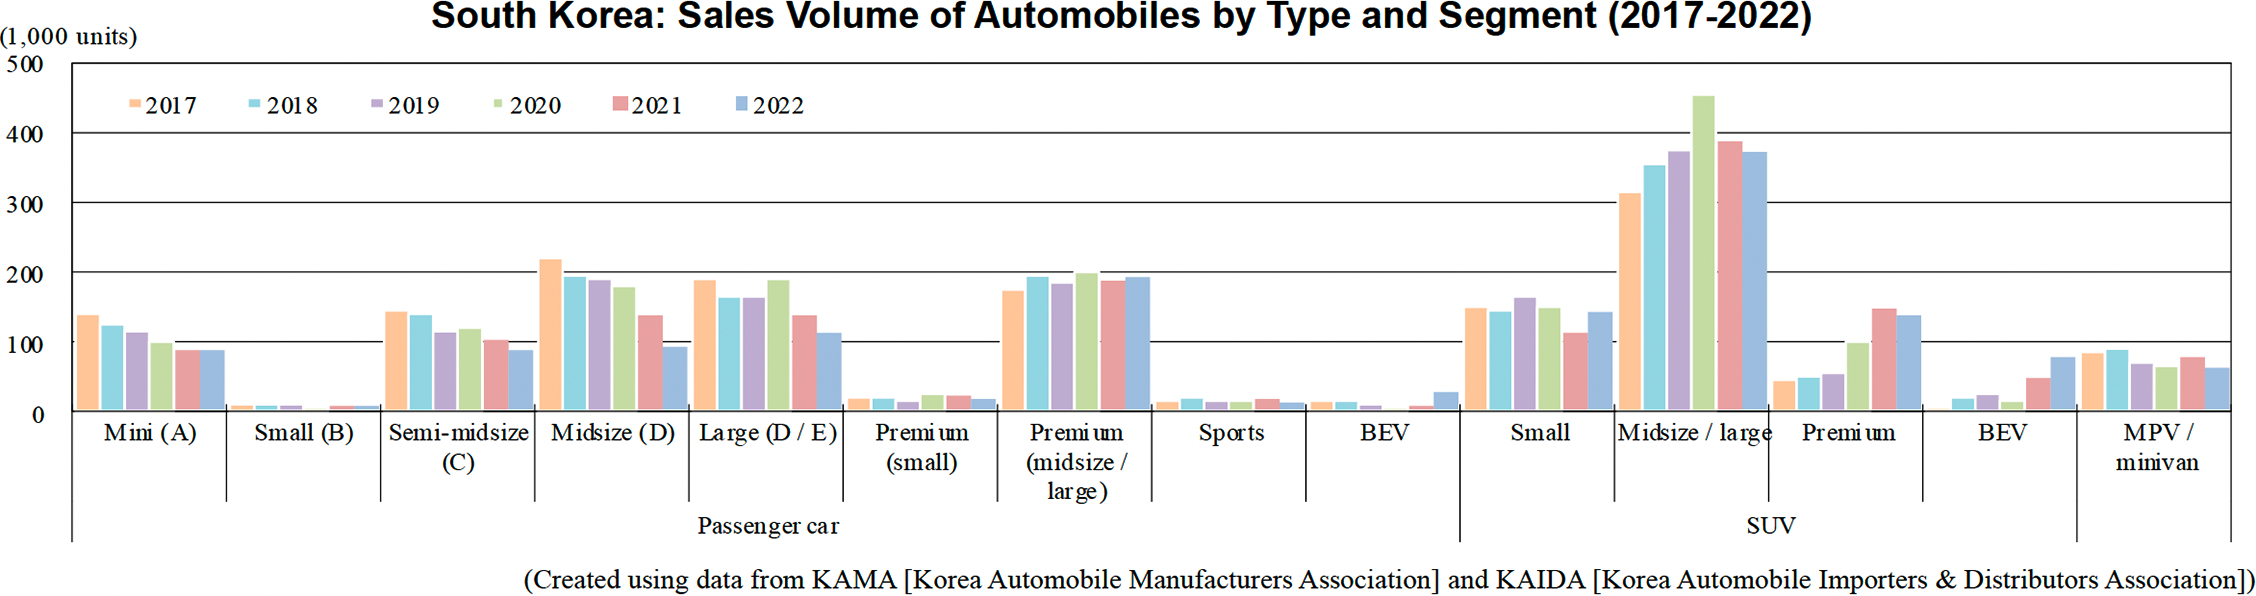 Bar graph: South Korea: Sales Volume of Automobiles by Type and Segment (2017-2022)